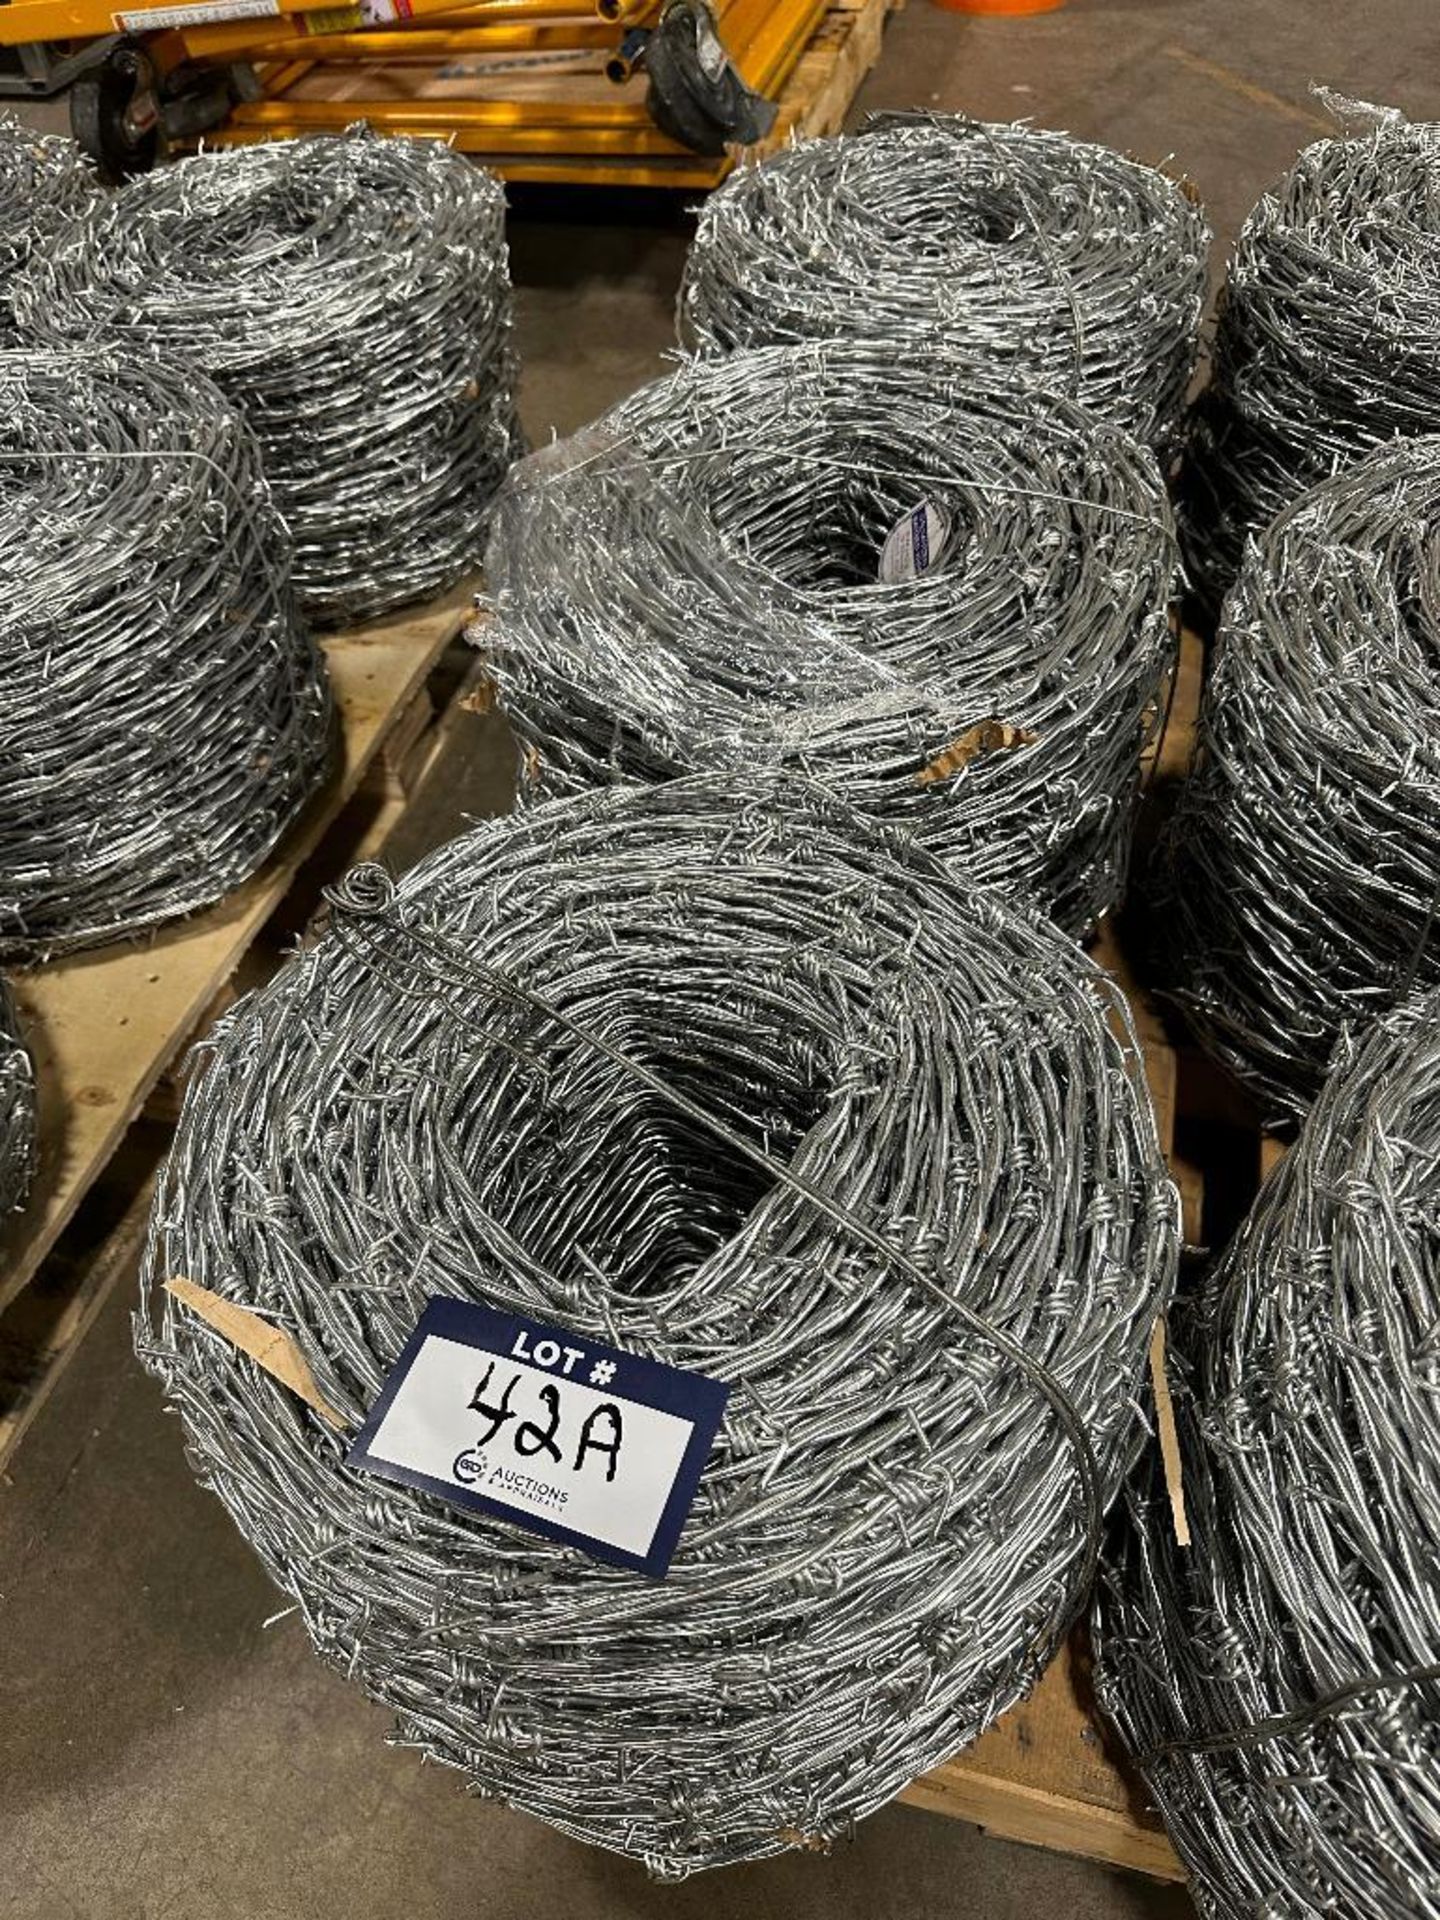 Lot of (3) 80lb. Rolls of Barbed Wire, Barb Spacing 6" - Image 2 of 3